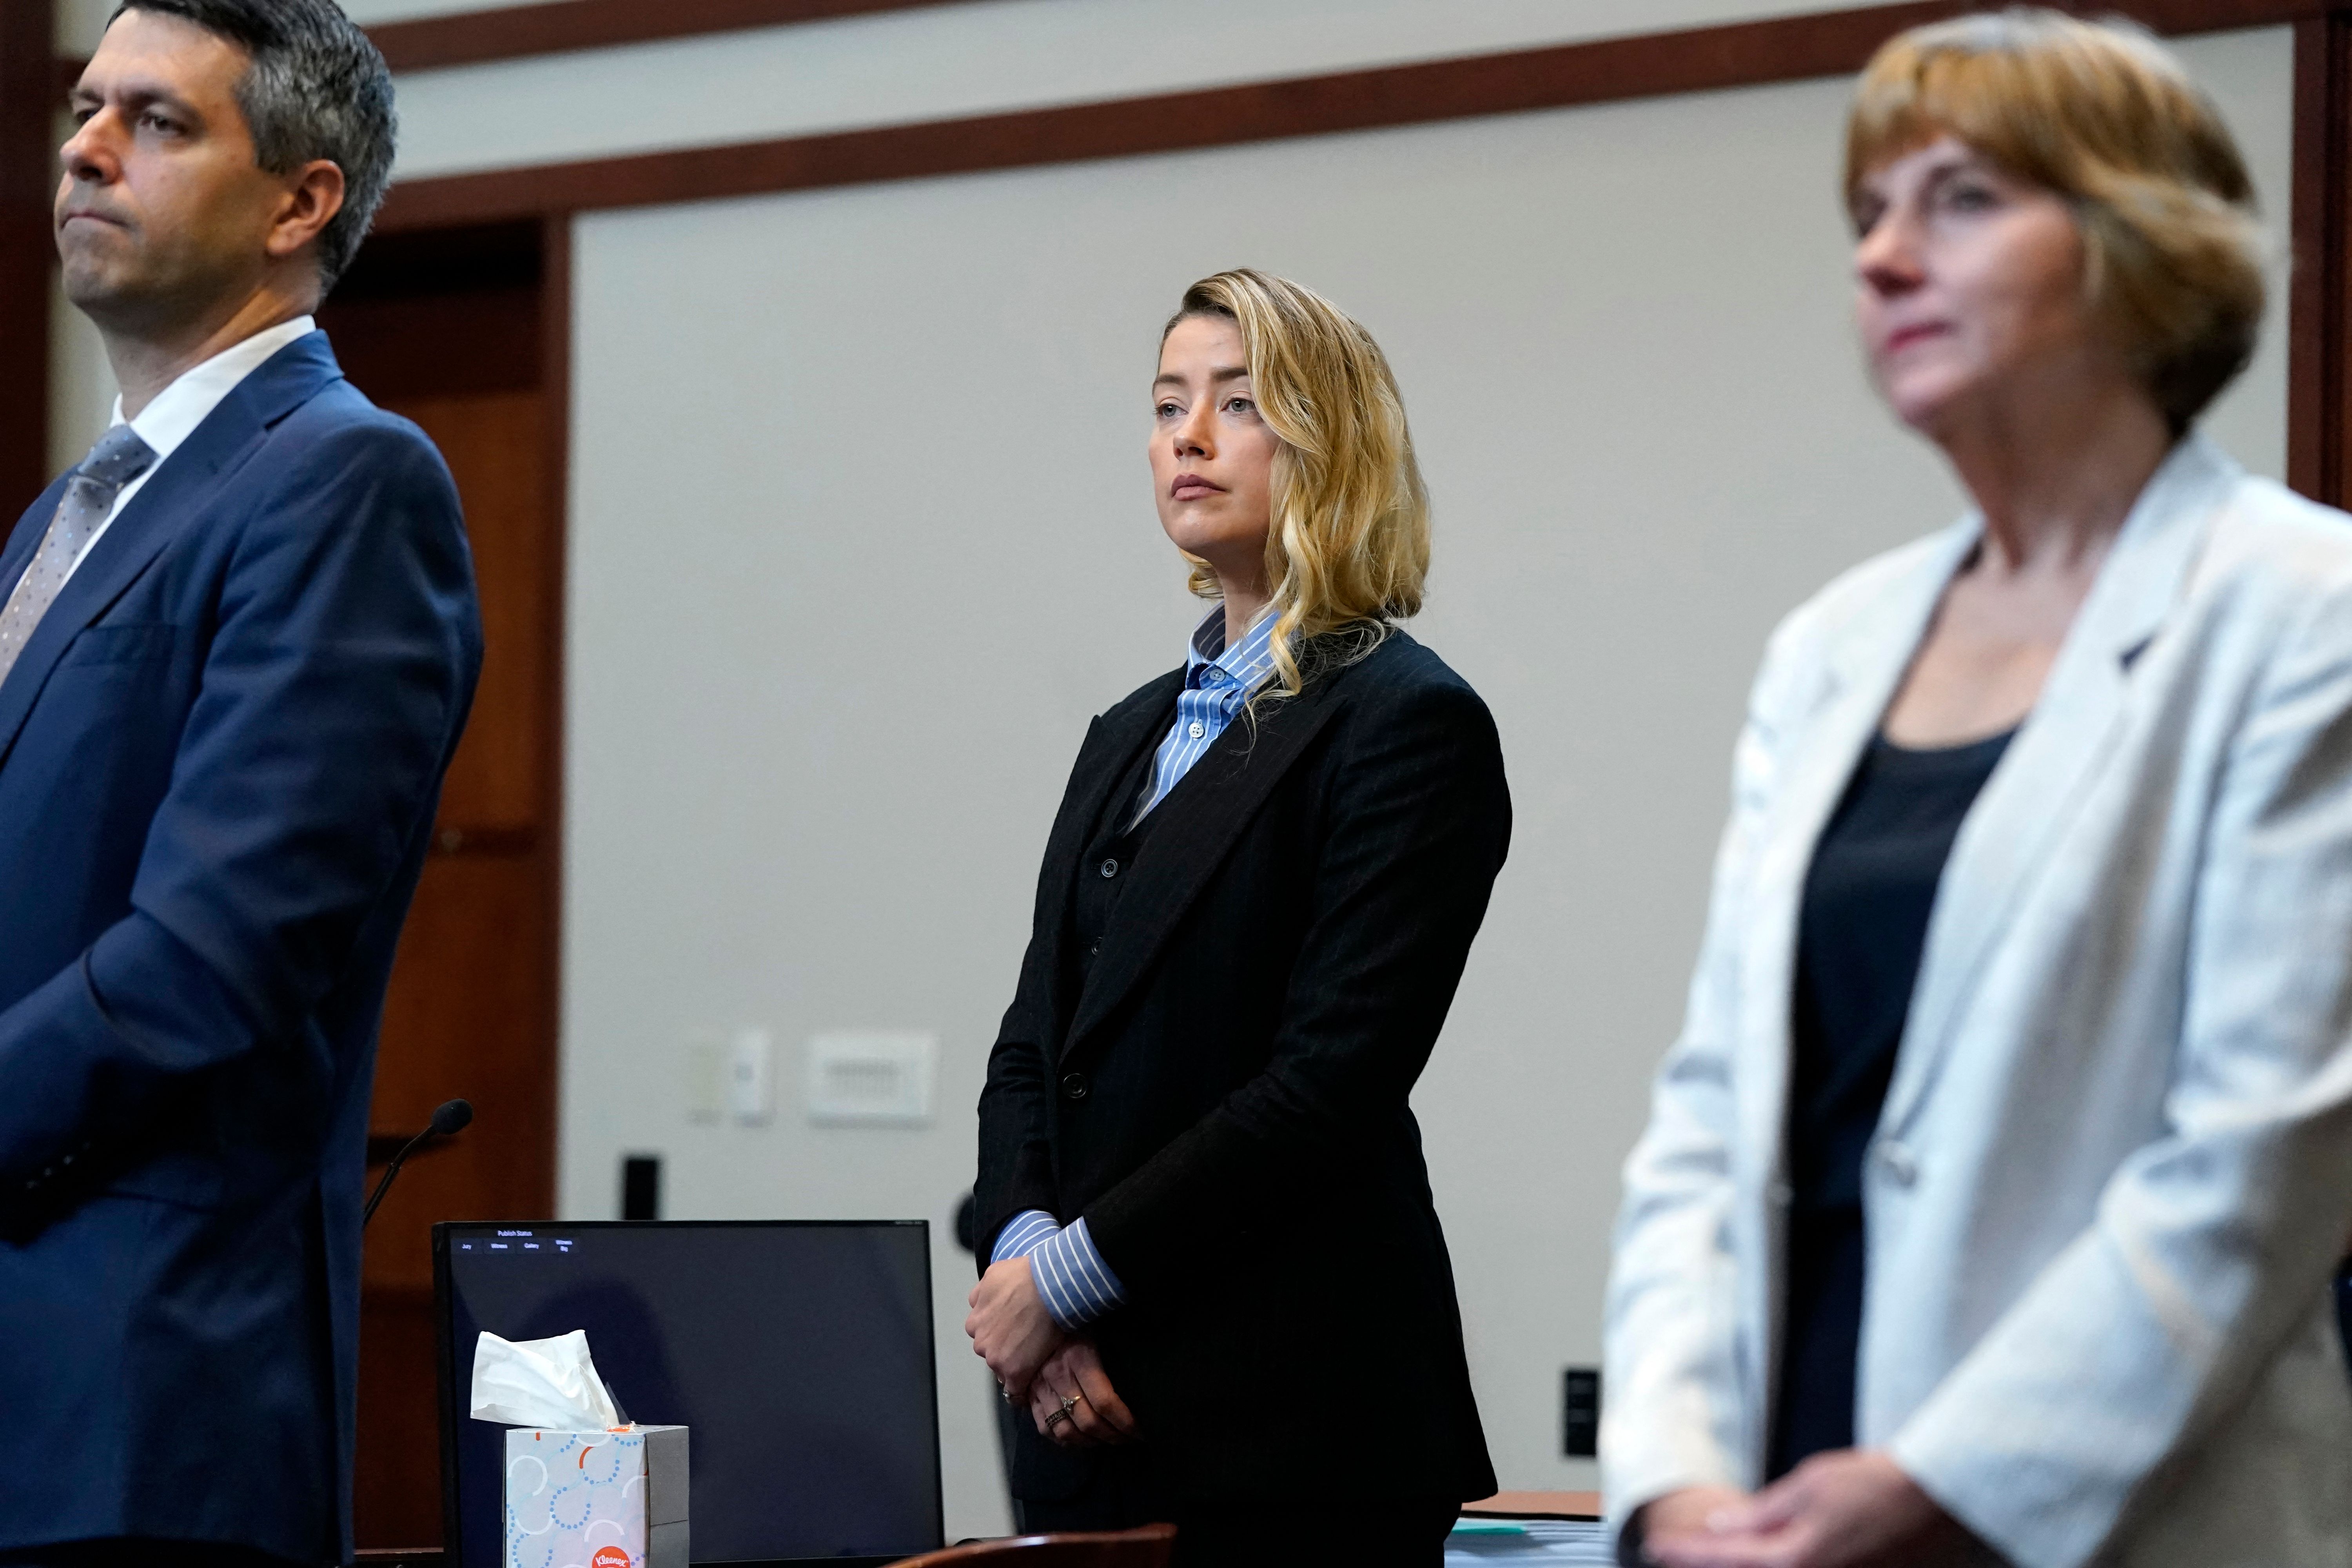 US actress Amber Heard (C) stands in the courtroom with her legal team at the Fairfax County Circuit Court, during a defamation case against her by ex-husband, US actor Johnny Depp, in Fairfax, Virginia, on May 4, 2022.